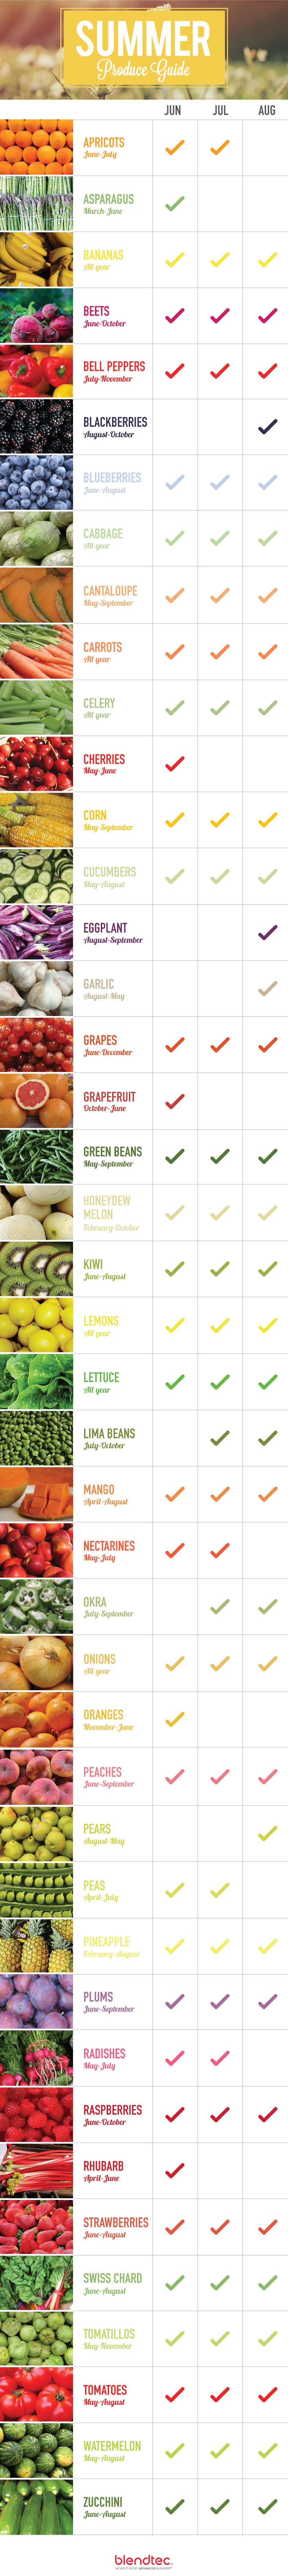 summer produce guide